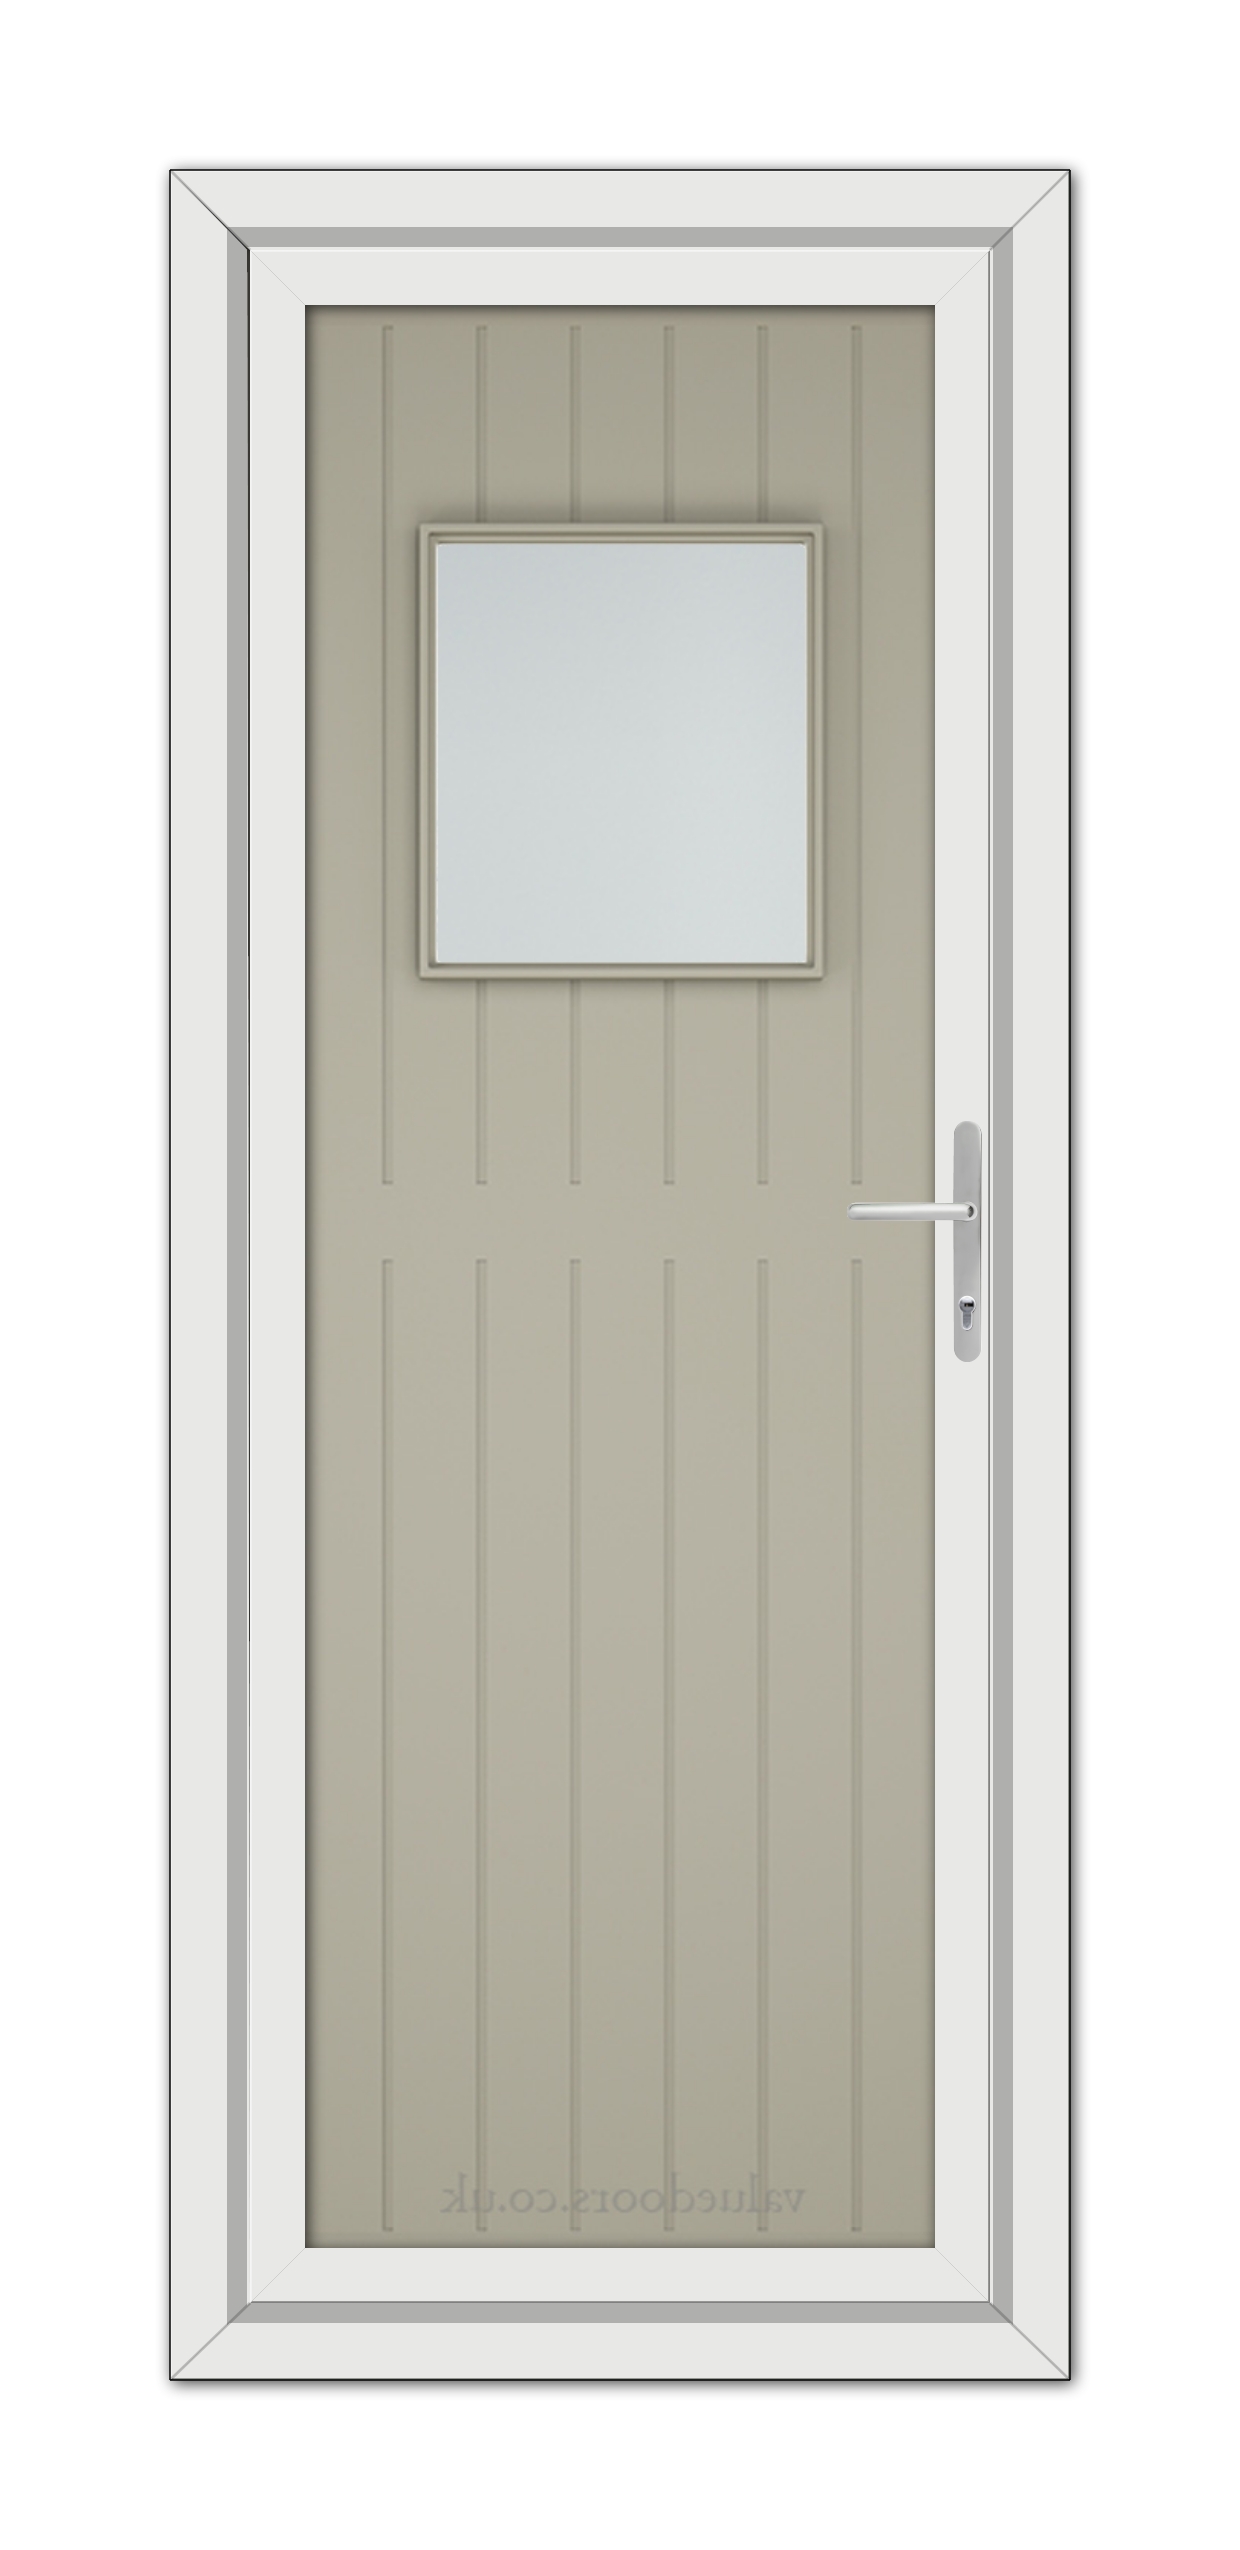 A modern Pebble Grey Chatsworth uPVC door with a vertical panel design, small square window at the top, and a silver handle, set within a white door frame.